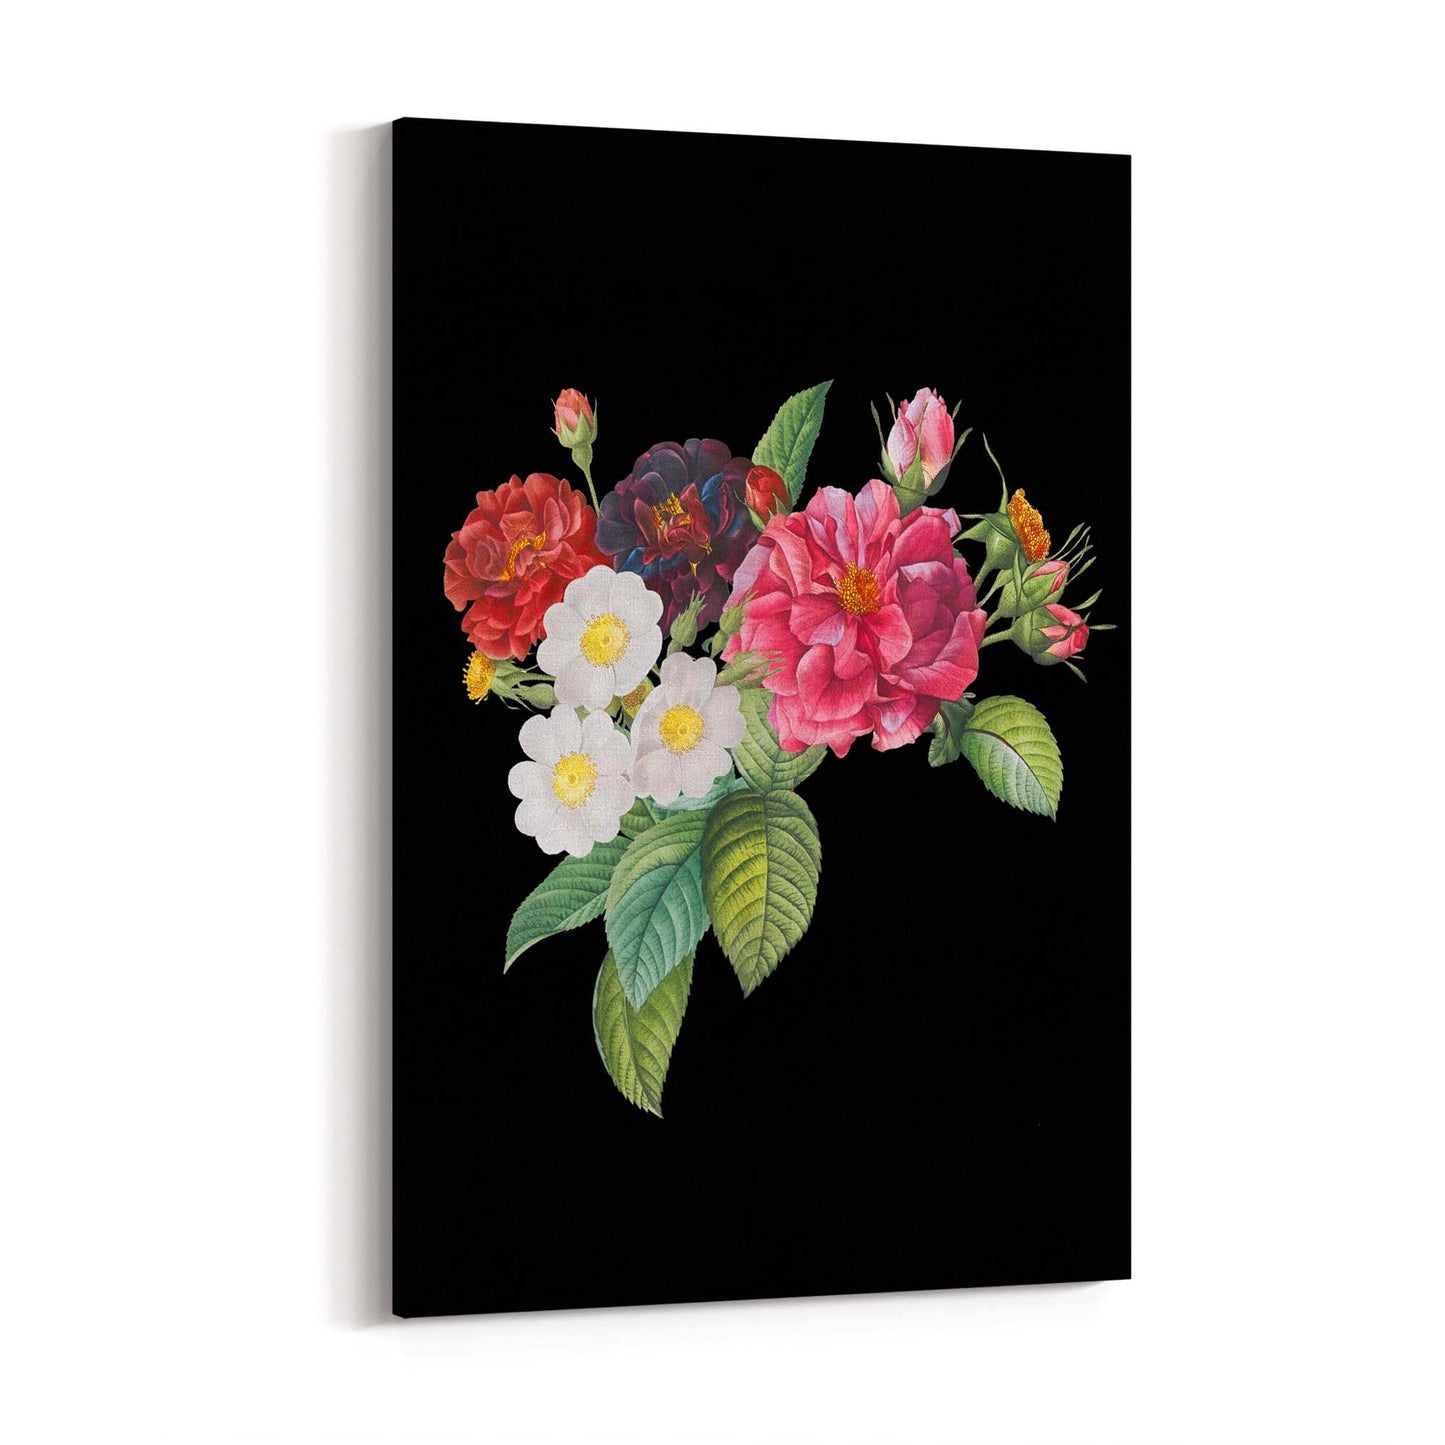 Botanical Flower Painting Floral Kitchen Wall Art #10 - The Affordable Art Company